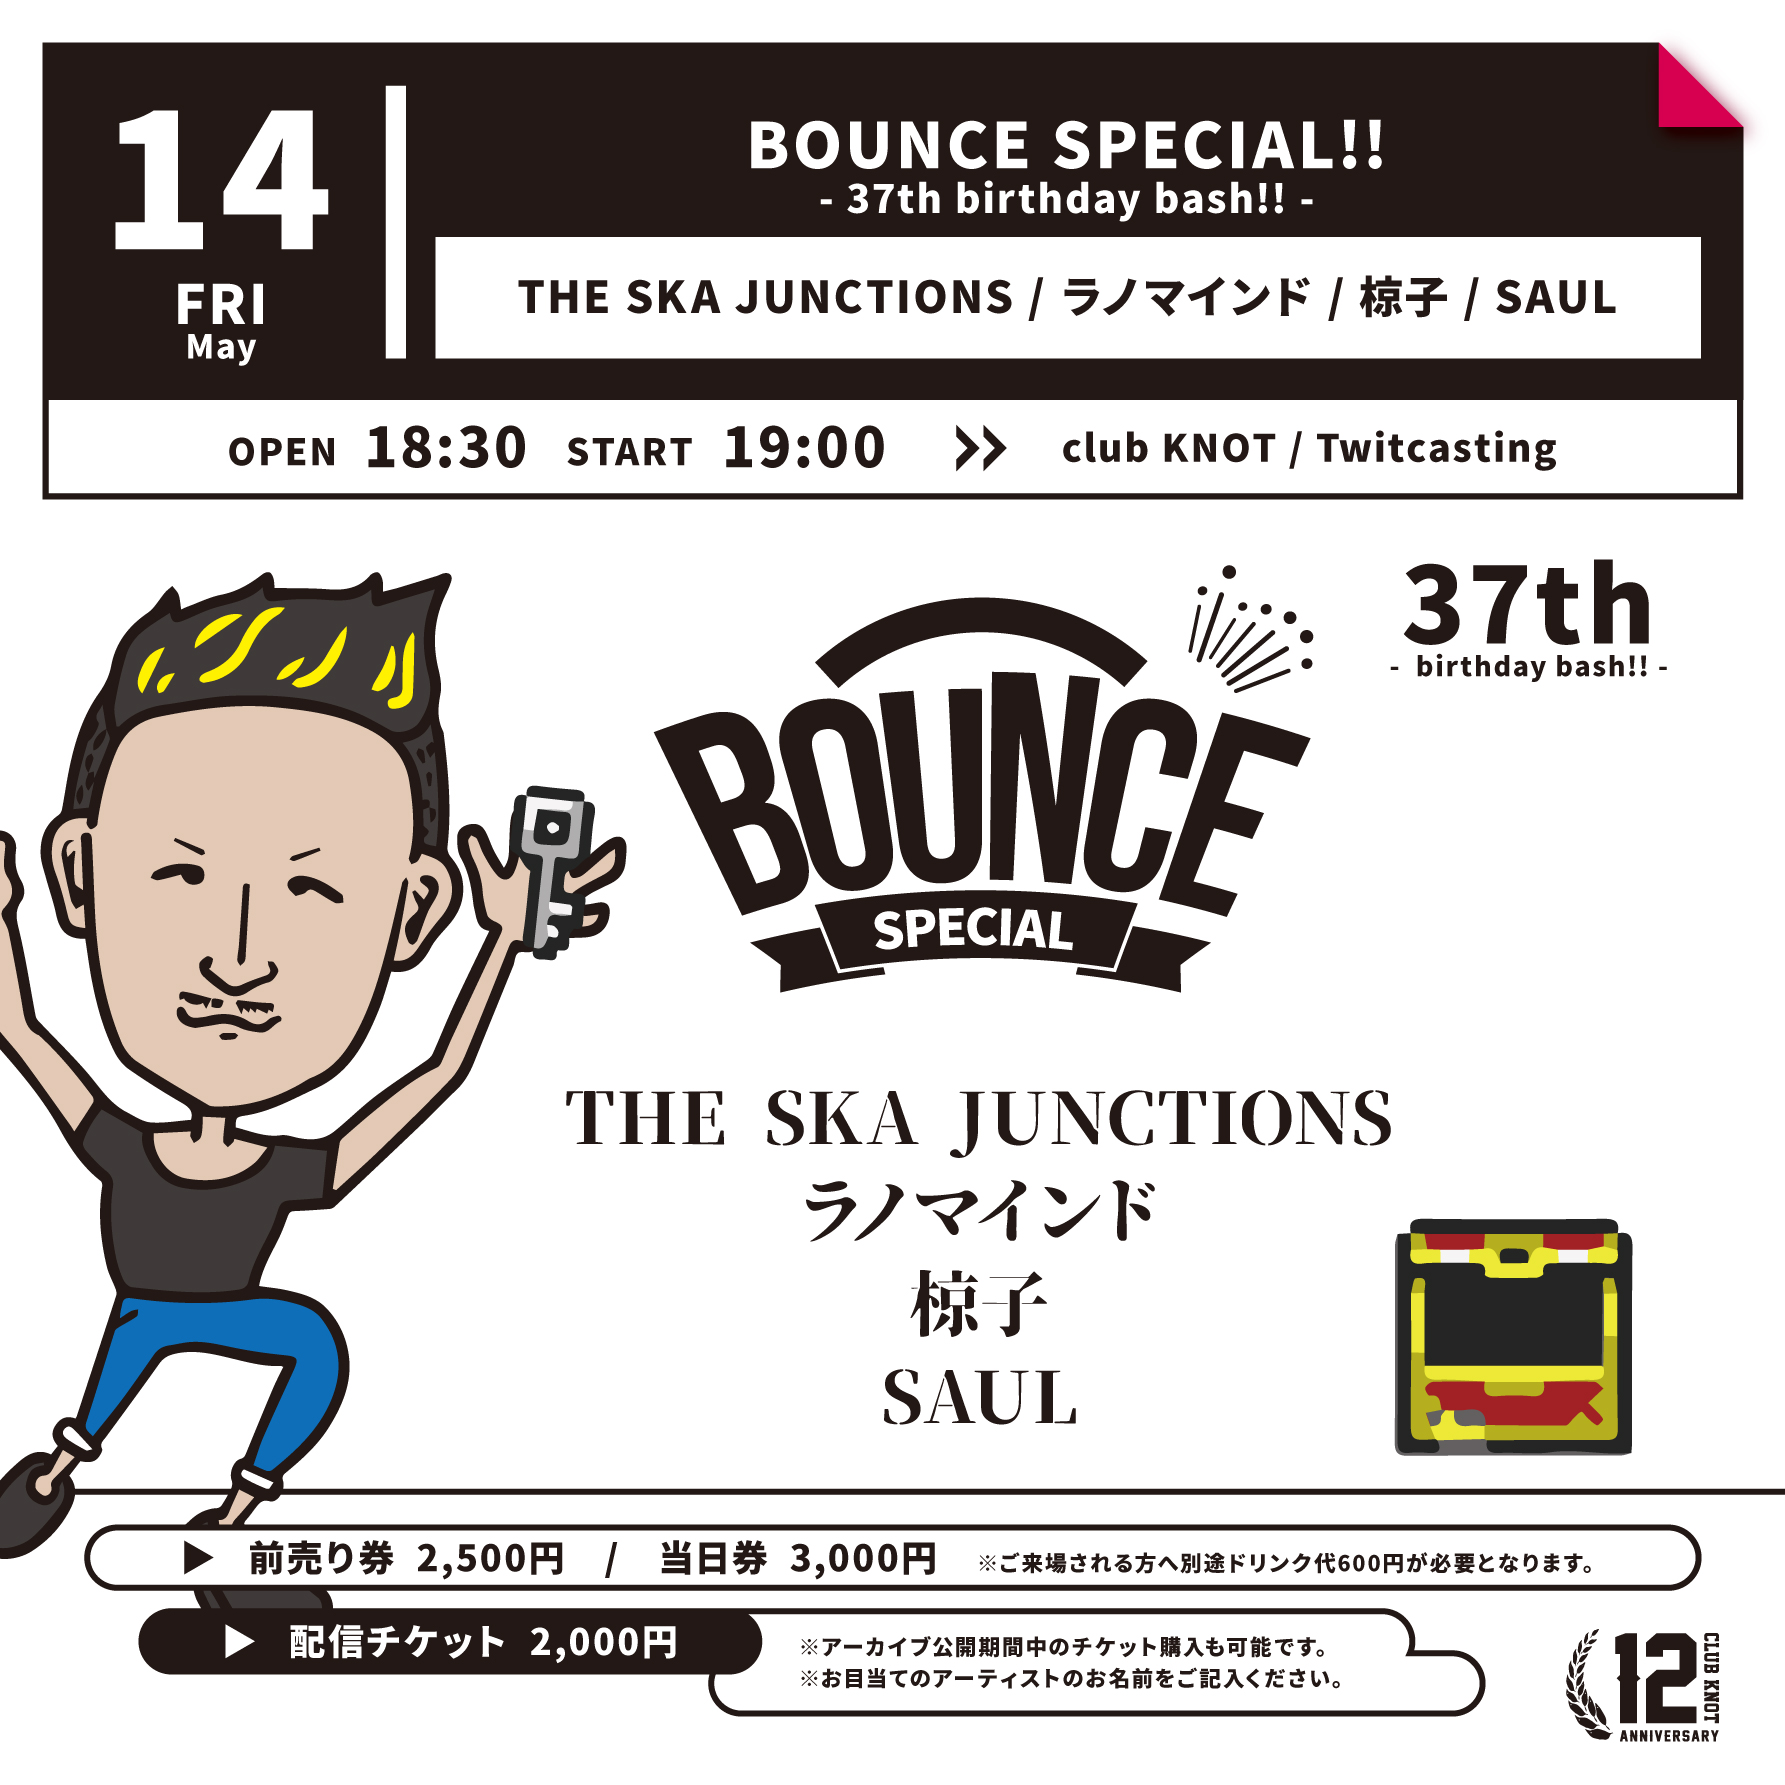 BOUNCE SPECIAL!!